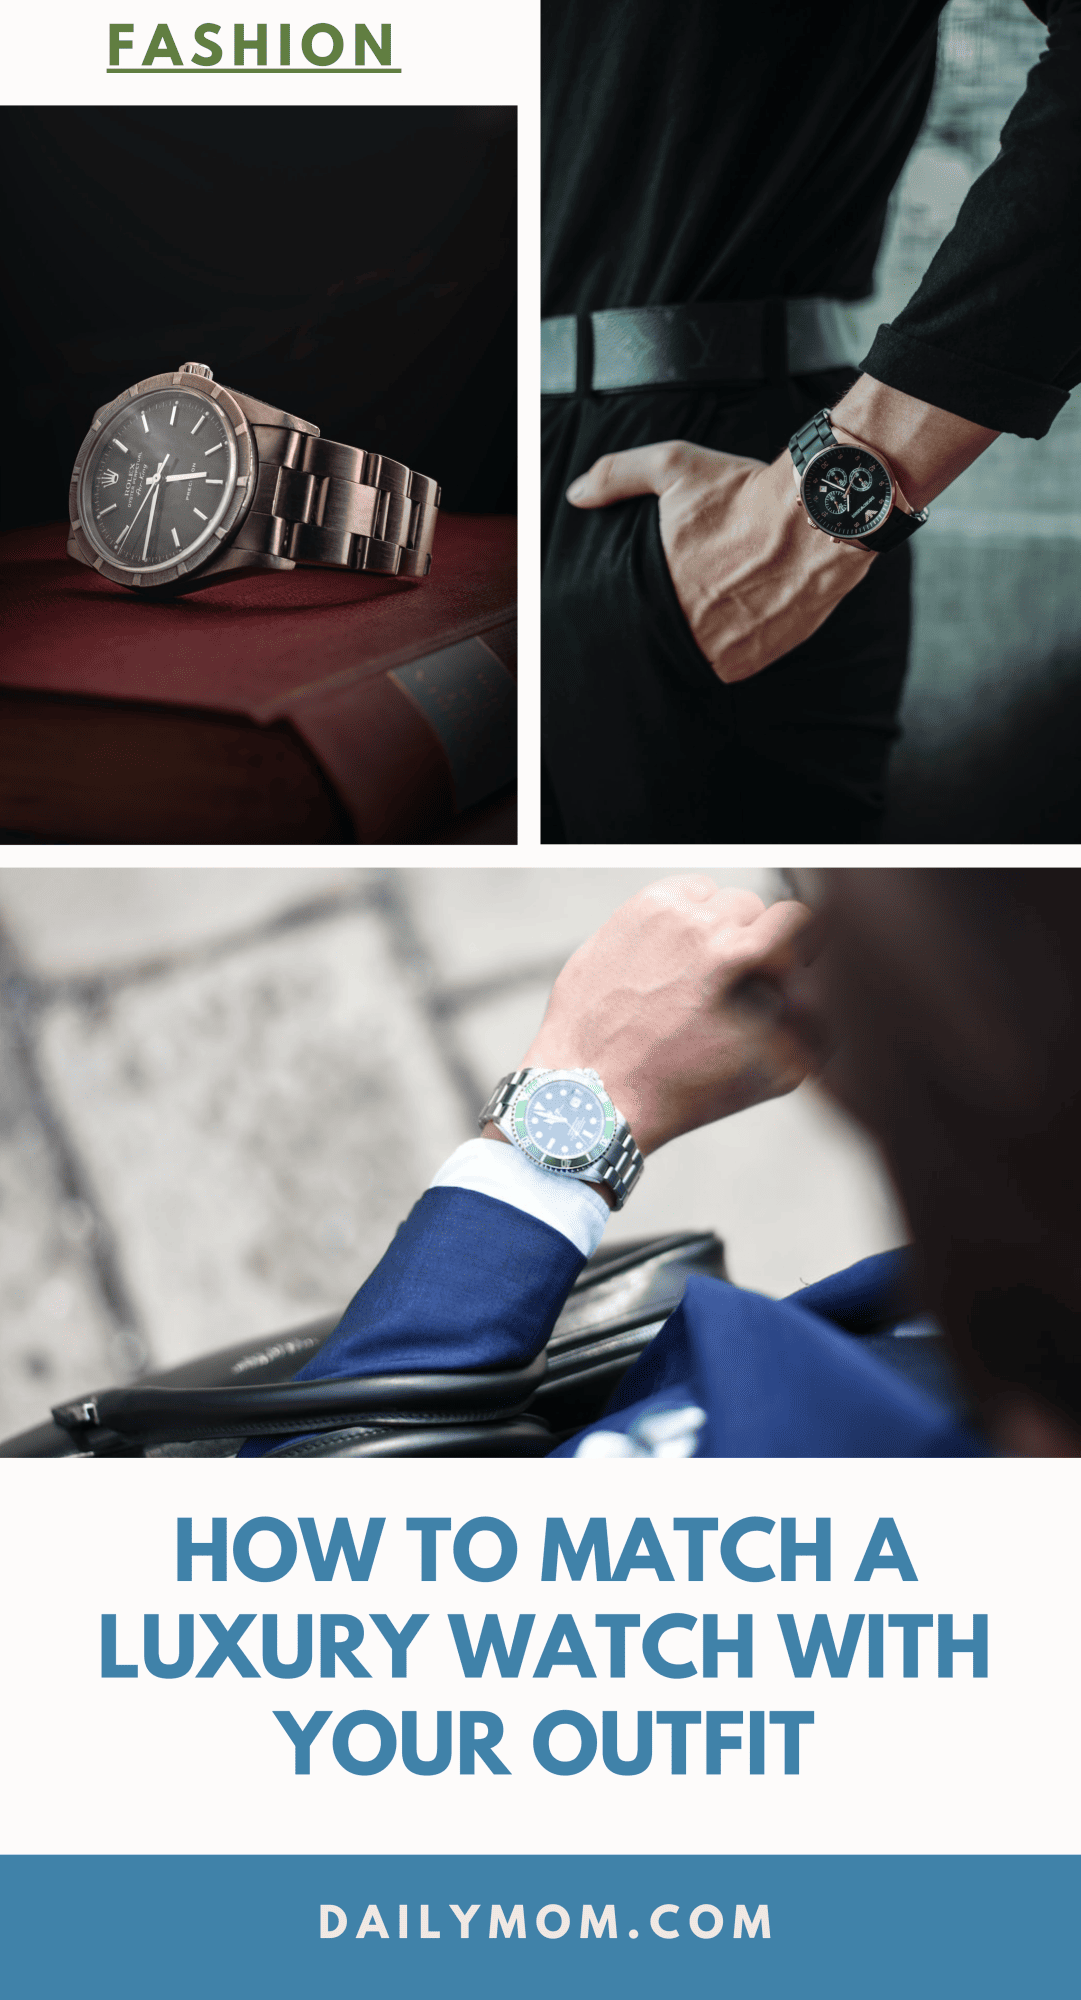 How To Match A Luxury Watch With Your Outfit 6 Daily Mom, Magazine For Families